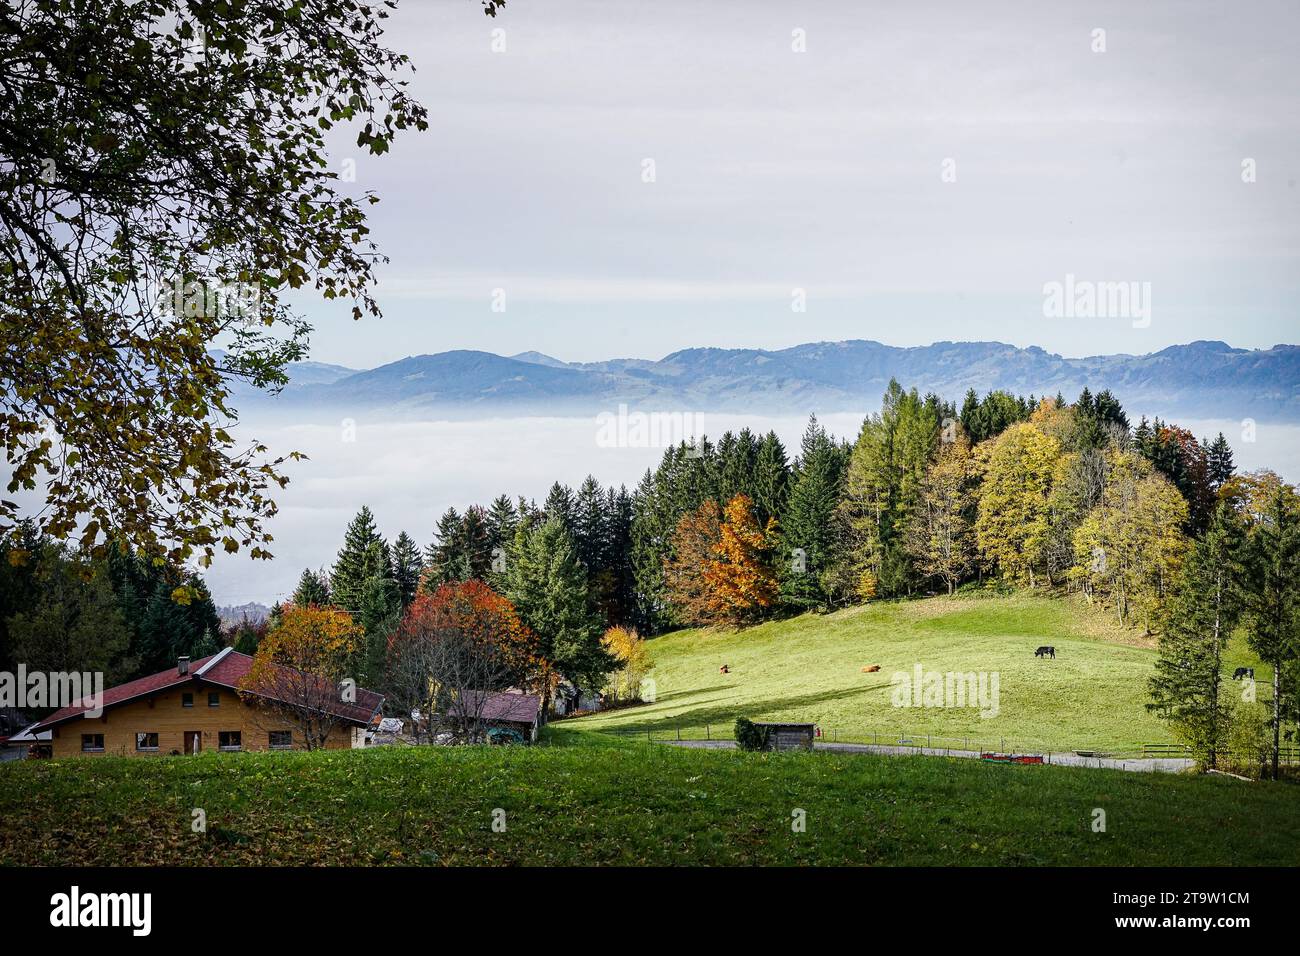 A foggy mountain view and in the foreground, a lush alpine meadow adds a touch of greenery to the scene. Stock Photo